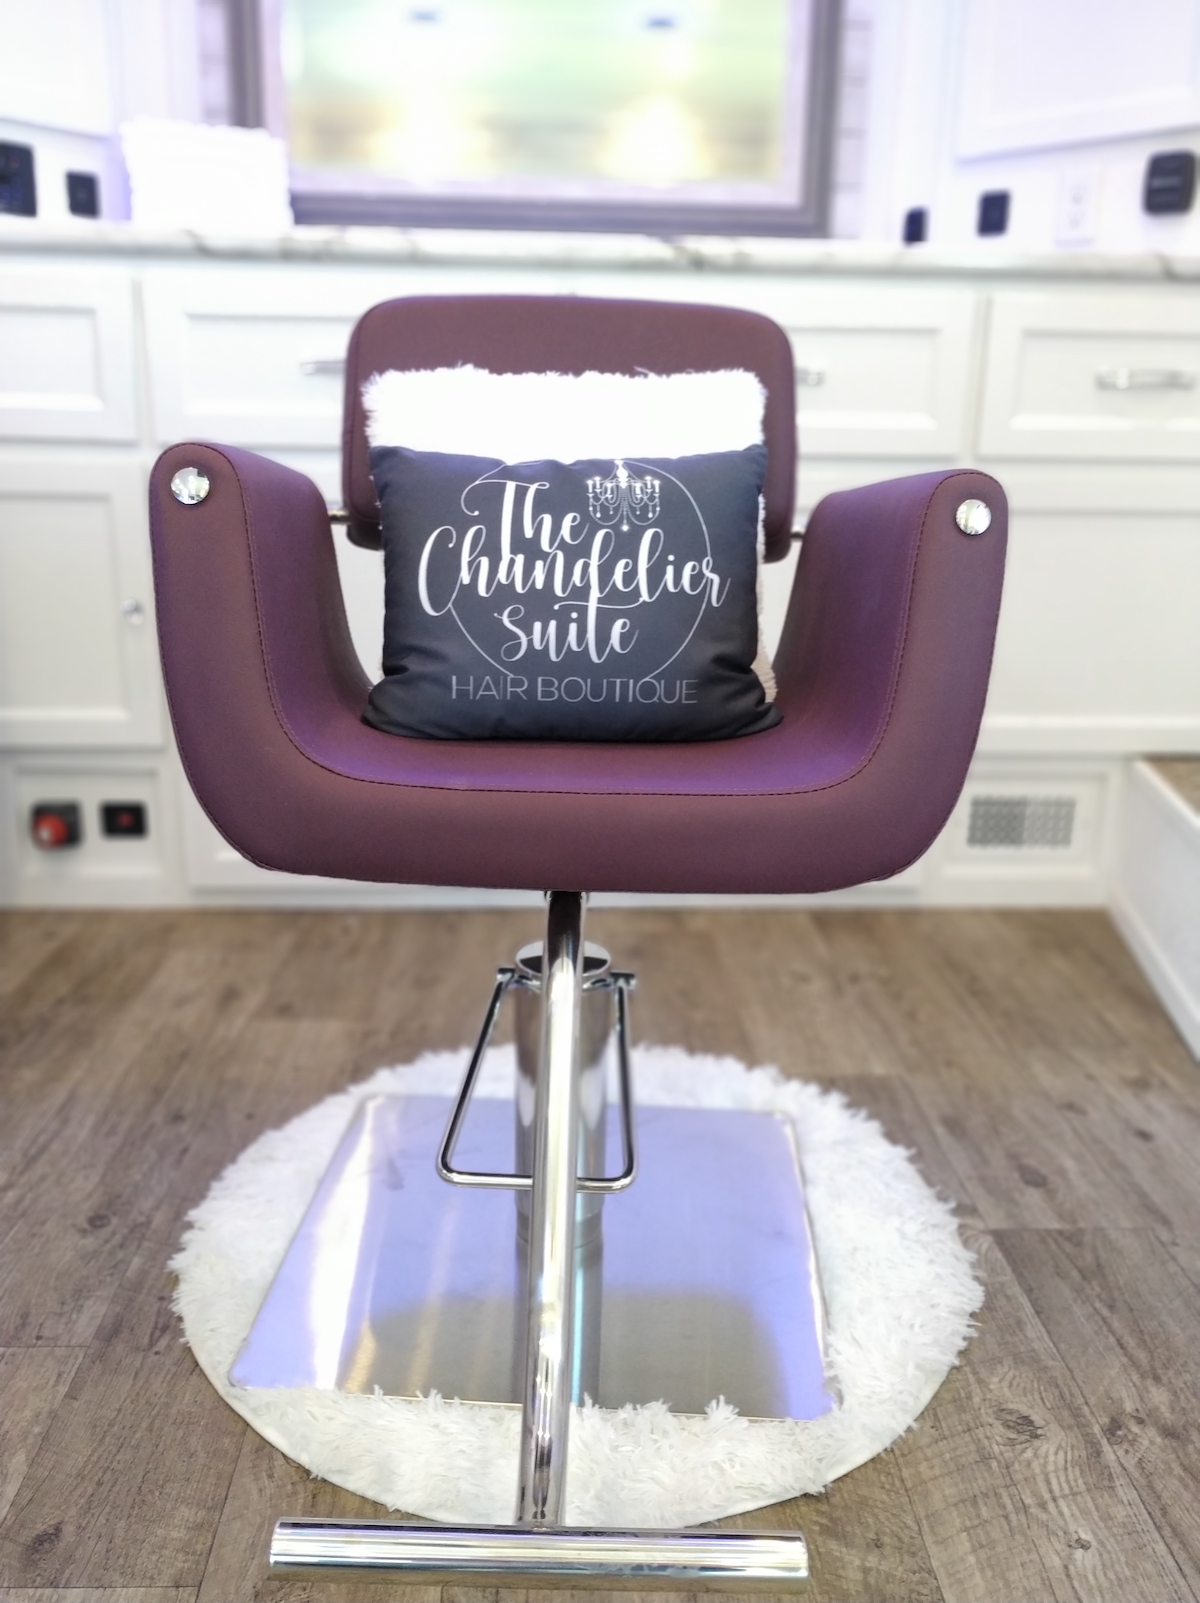 Purple beauty chair with pillow that says "The Chandelier Suite"